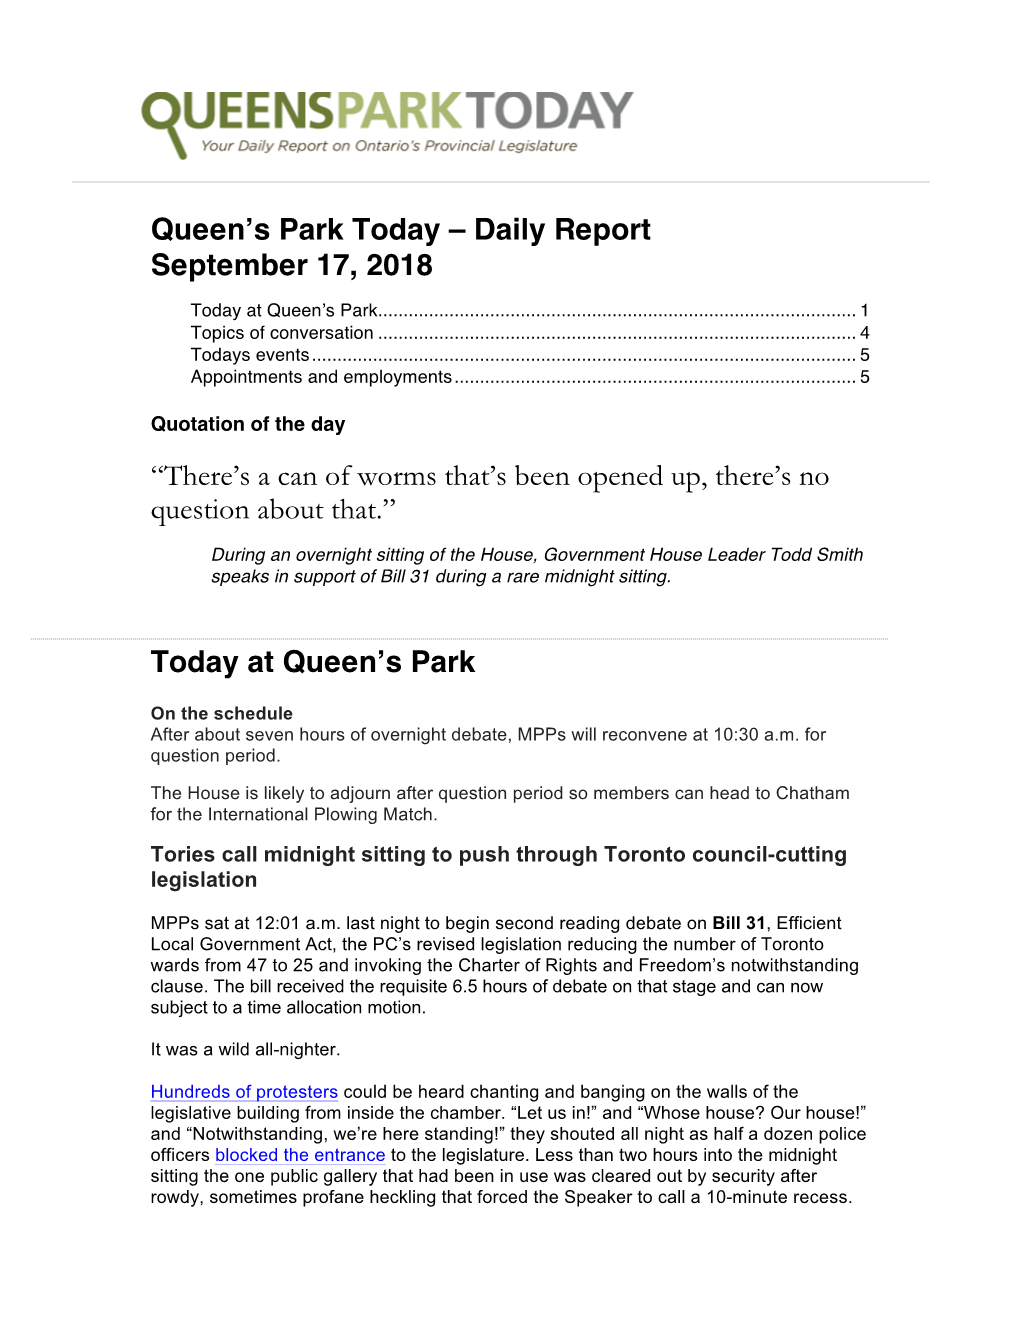 Queen's Park Today – Daily Report September 17